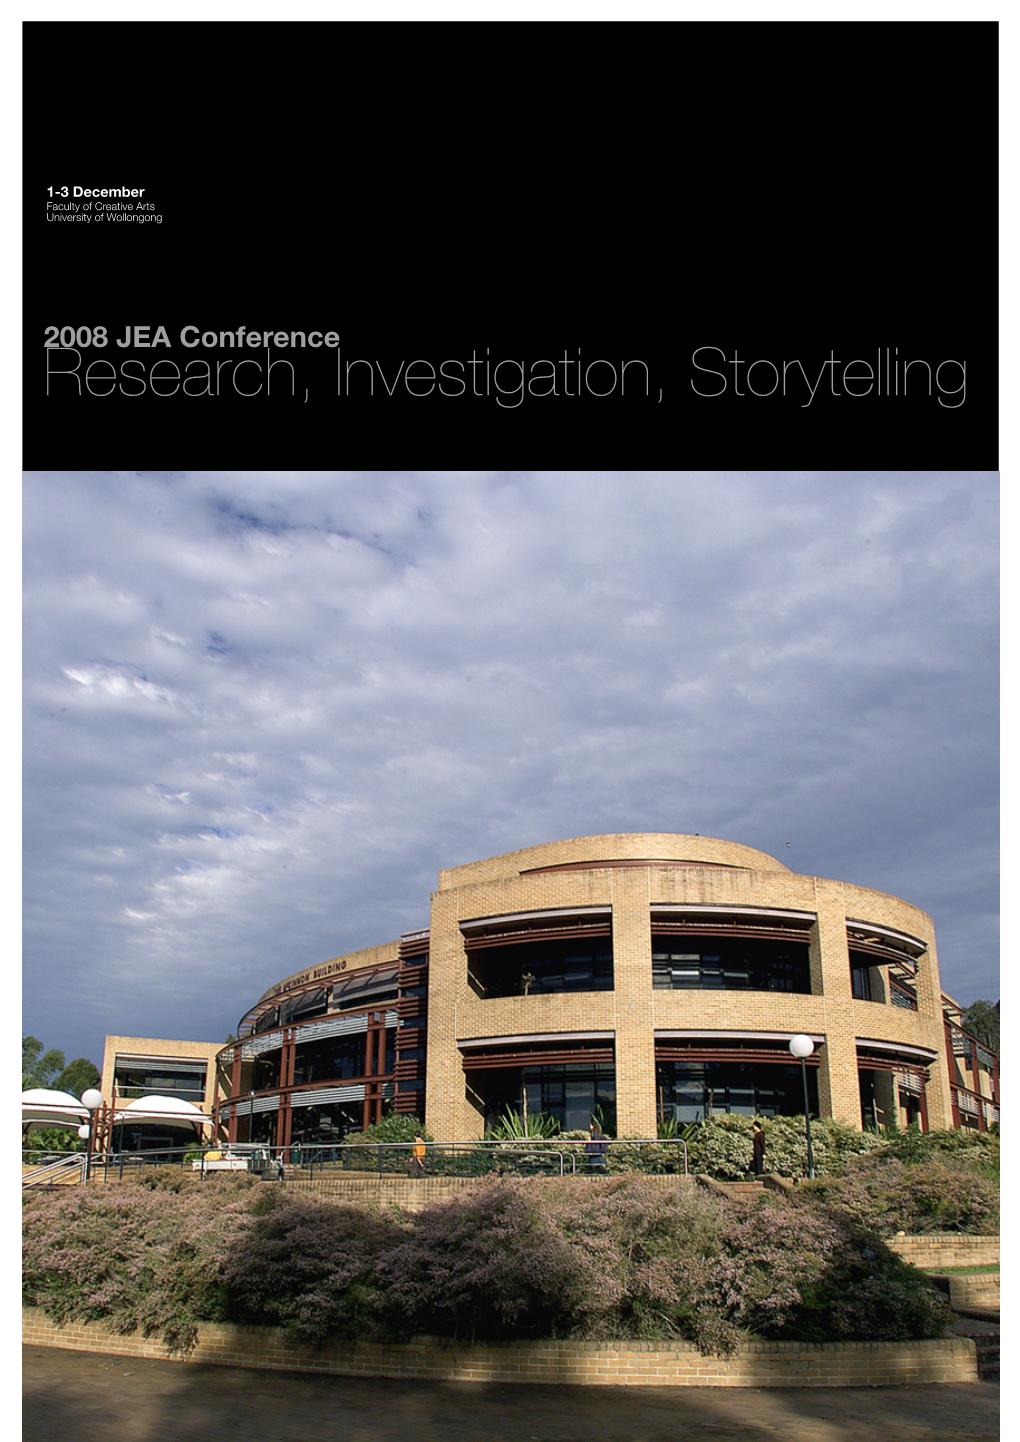 Research, Investigation, Storytelling